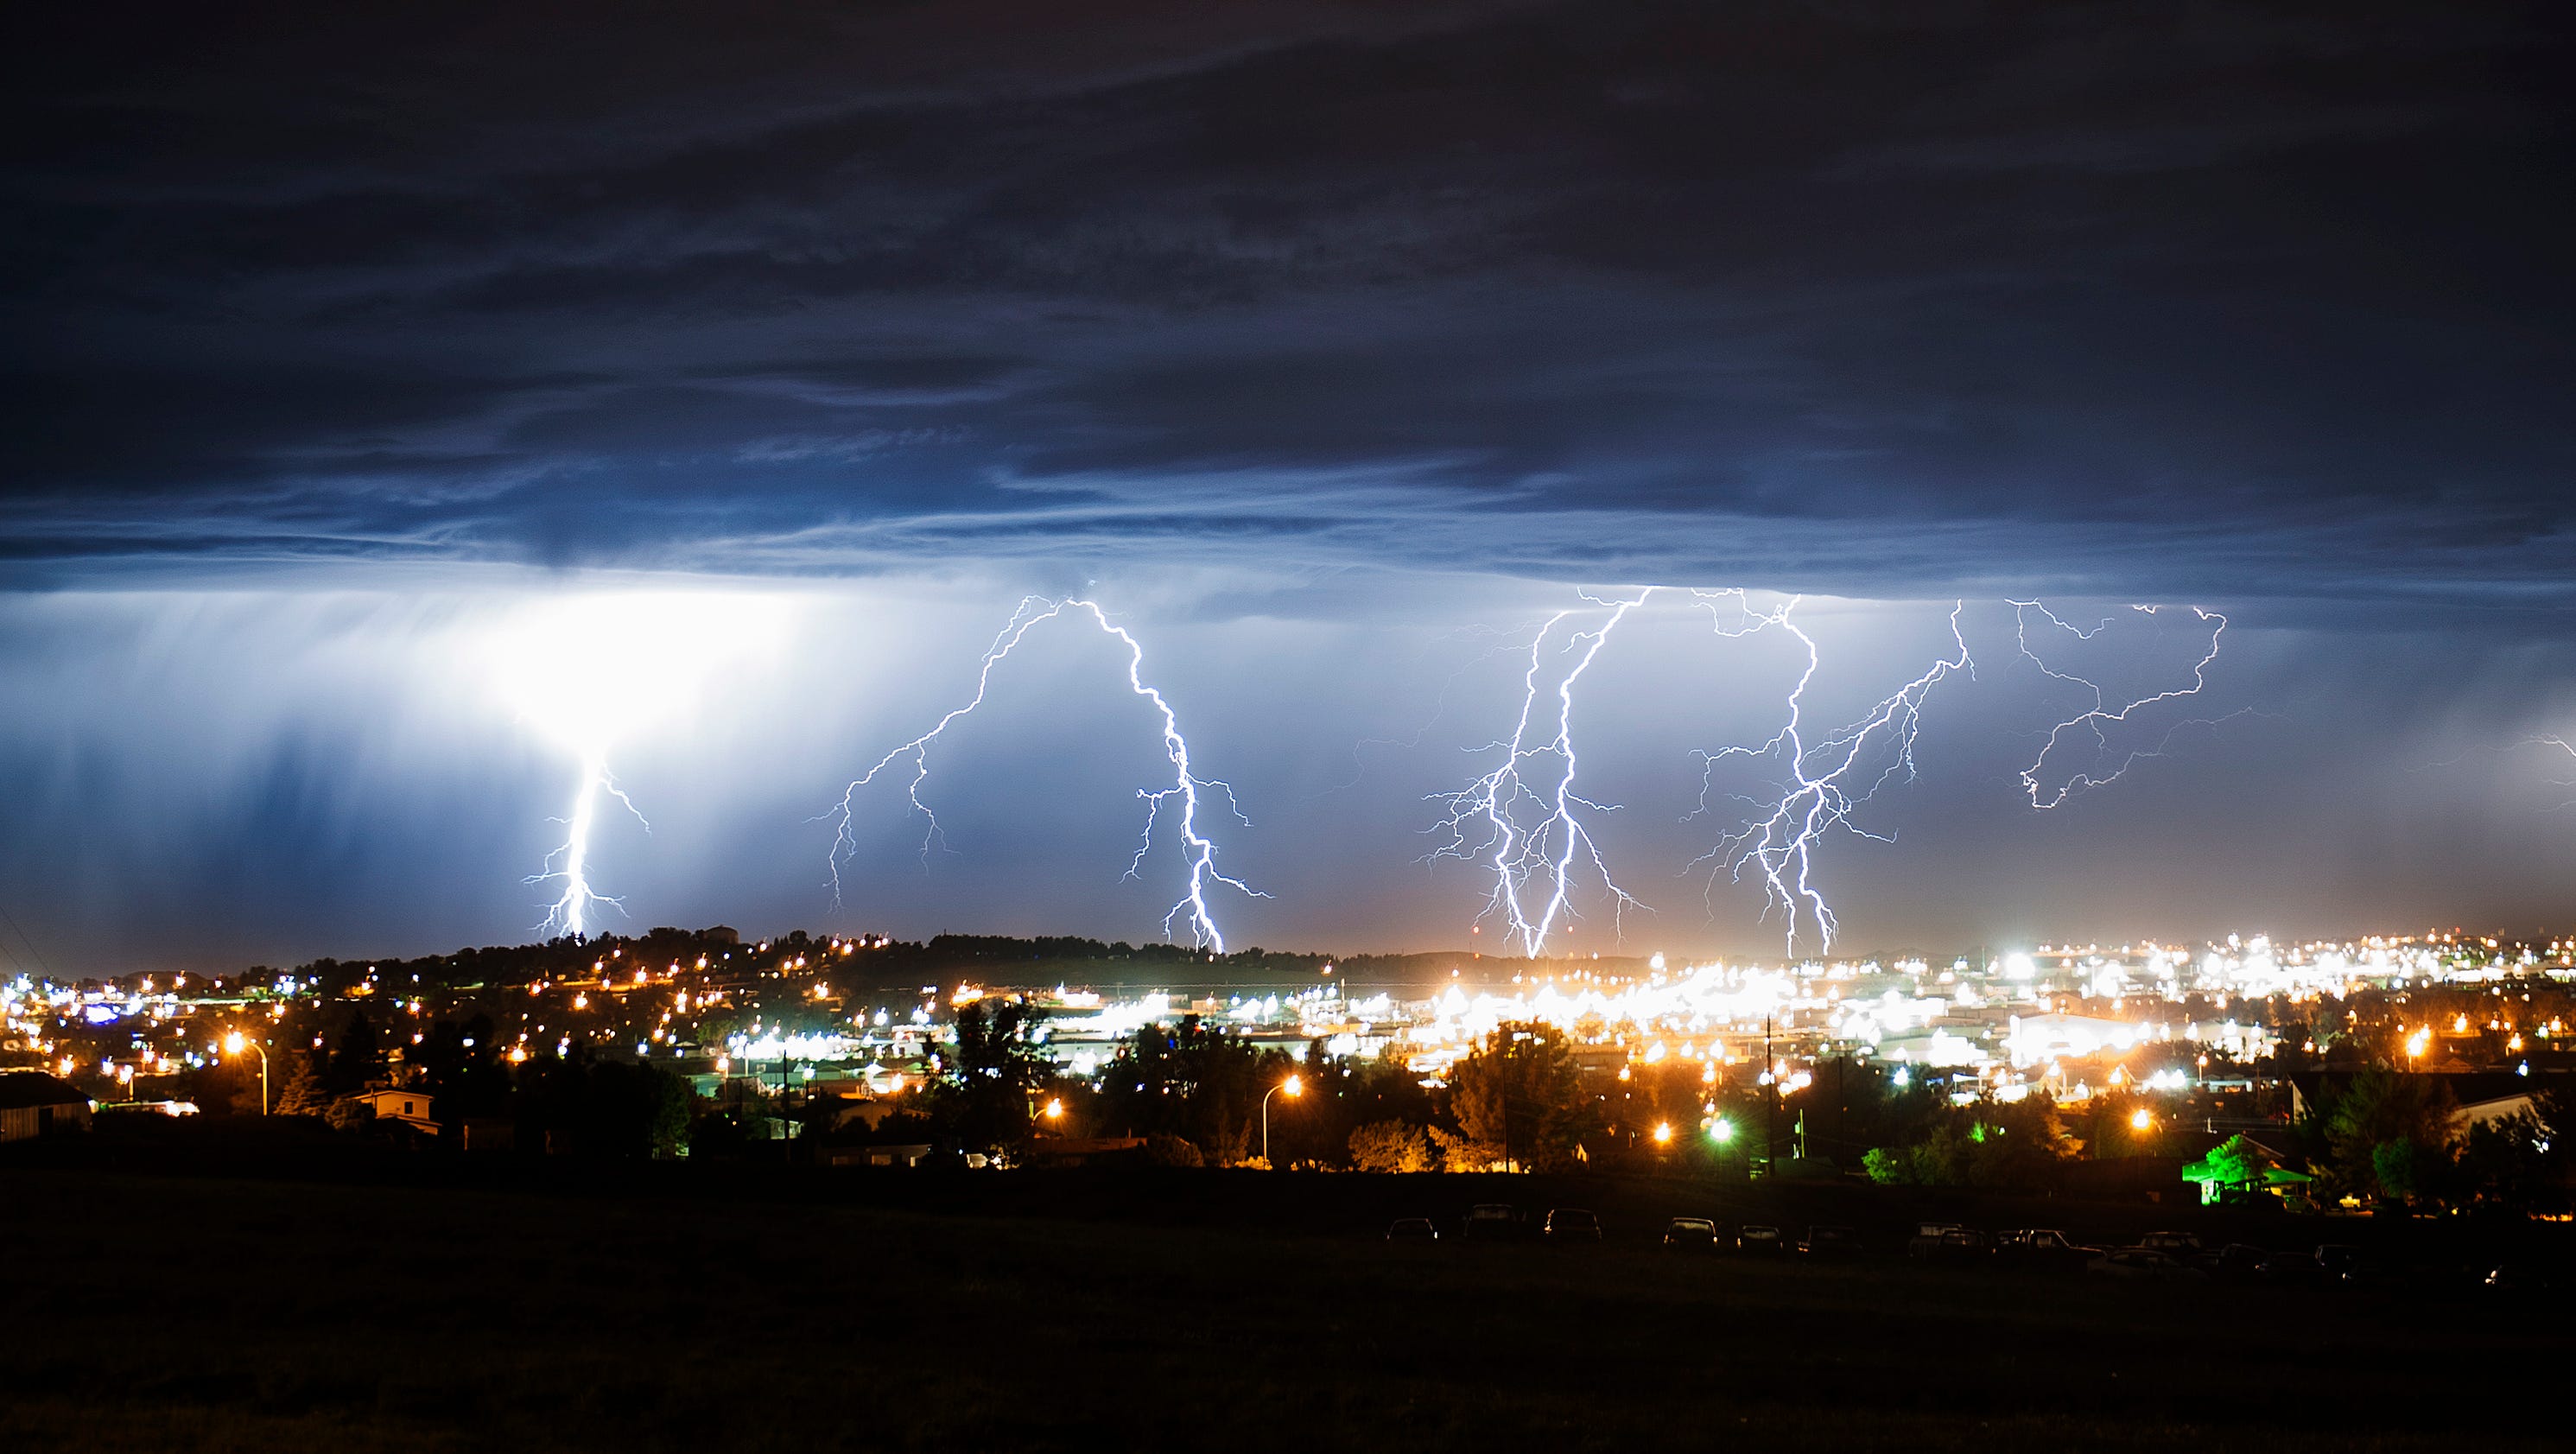 Watch out: July is peak month for lightning fatalities